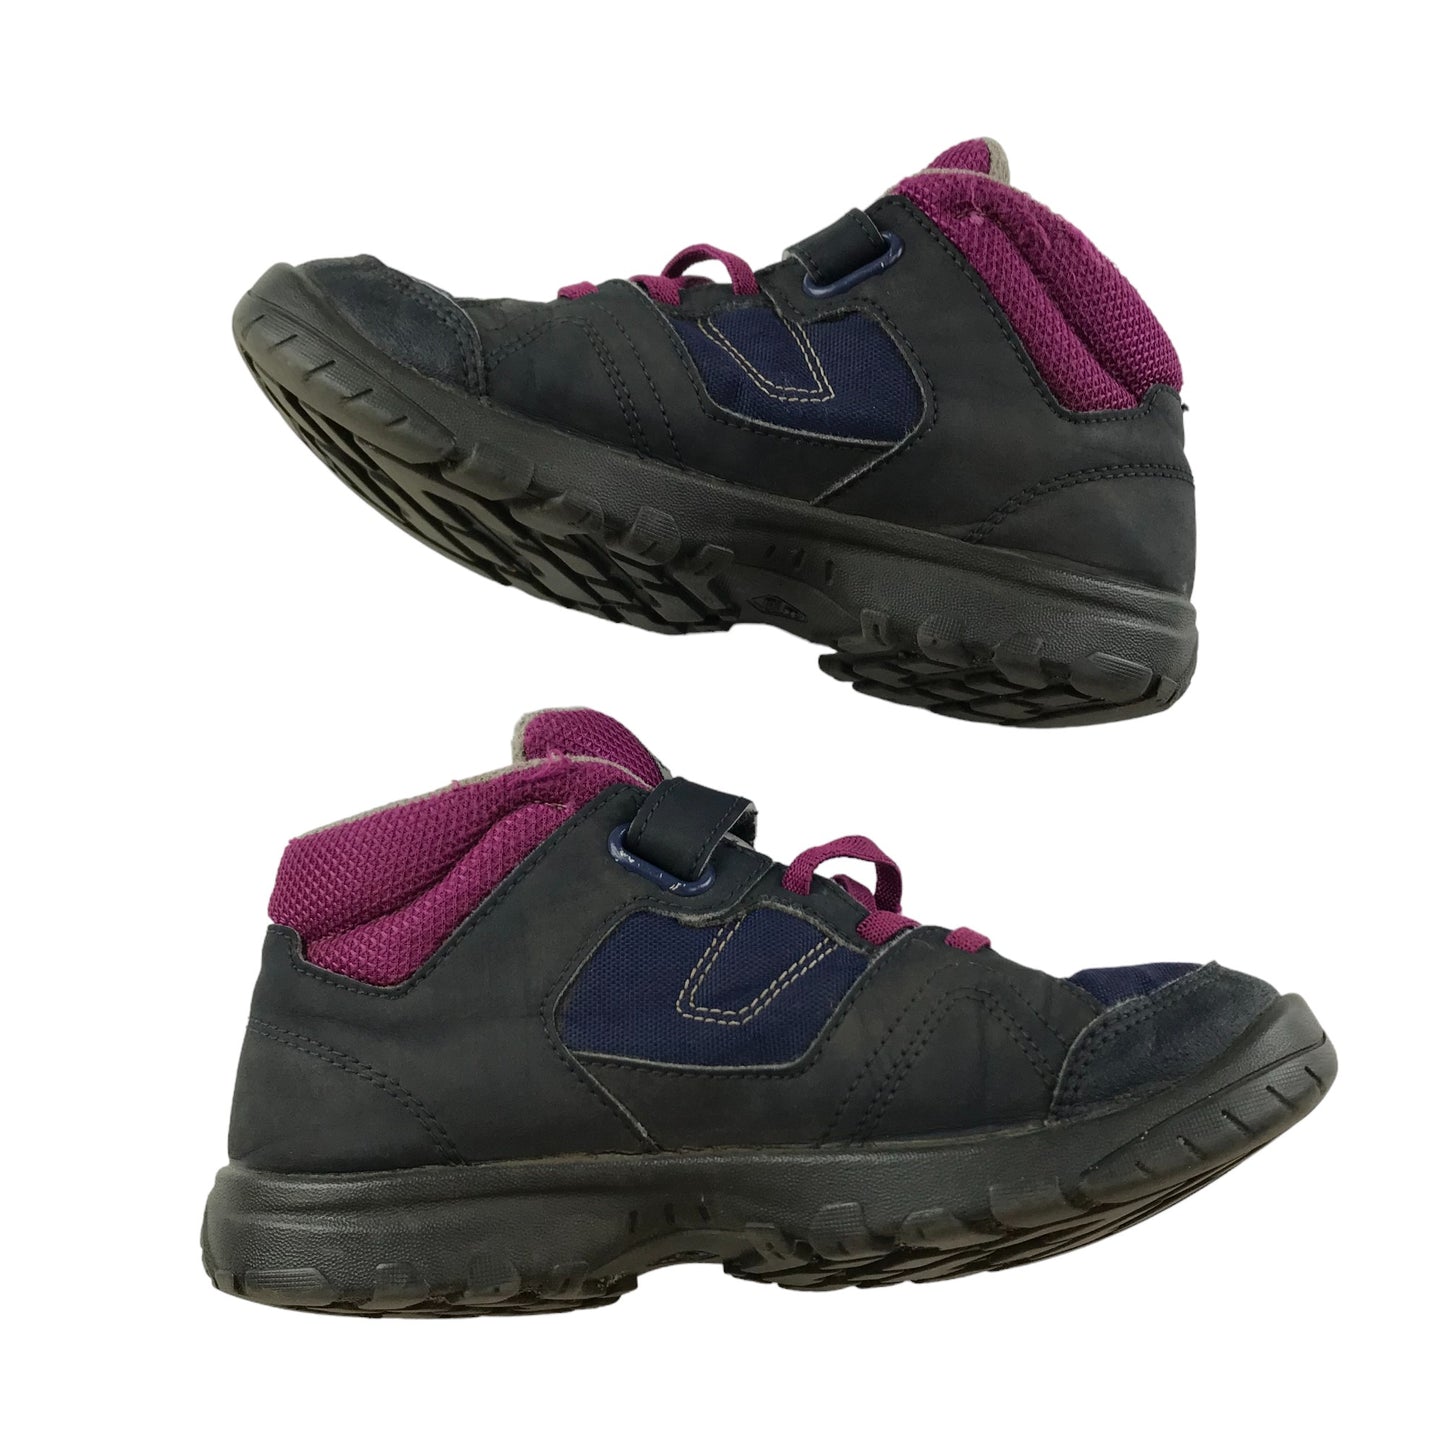 Decathlon Walking Boots Shoe Size 1.5 Grey Navy and Purple with Laces